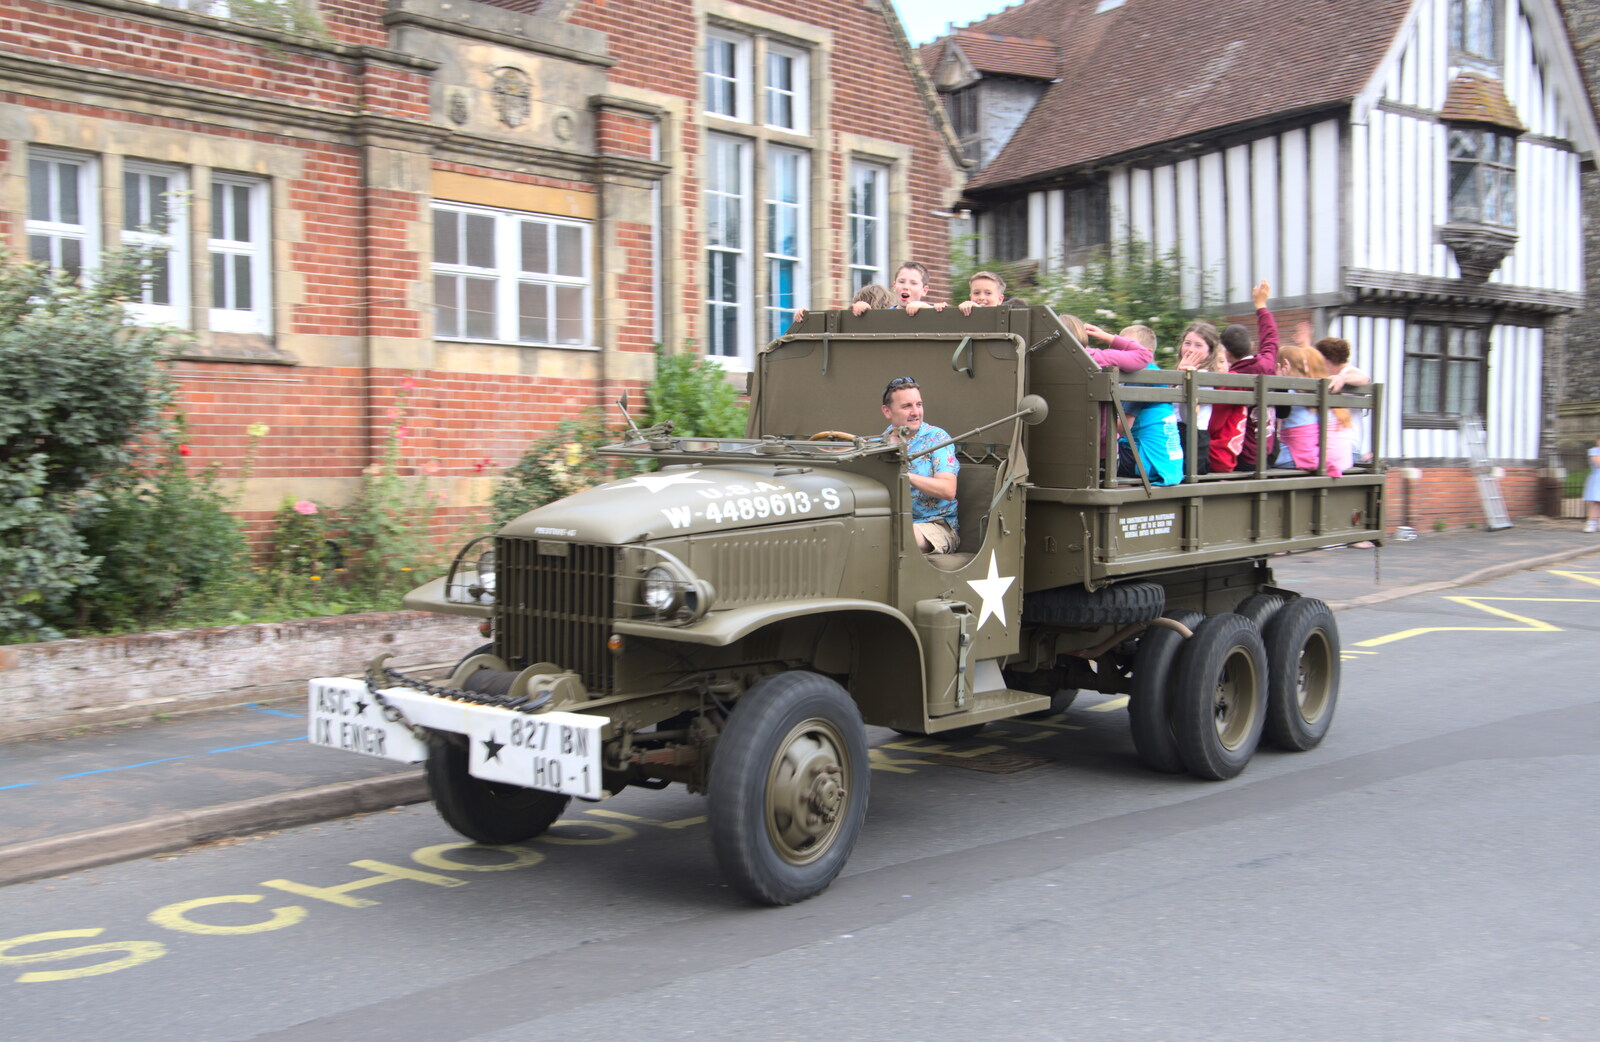 Clive drives the truck up the street from Fred's Last Day of Primary School, Eye, Suffolk - 22nd July 2020